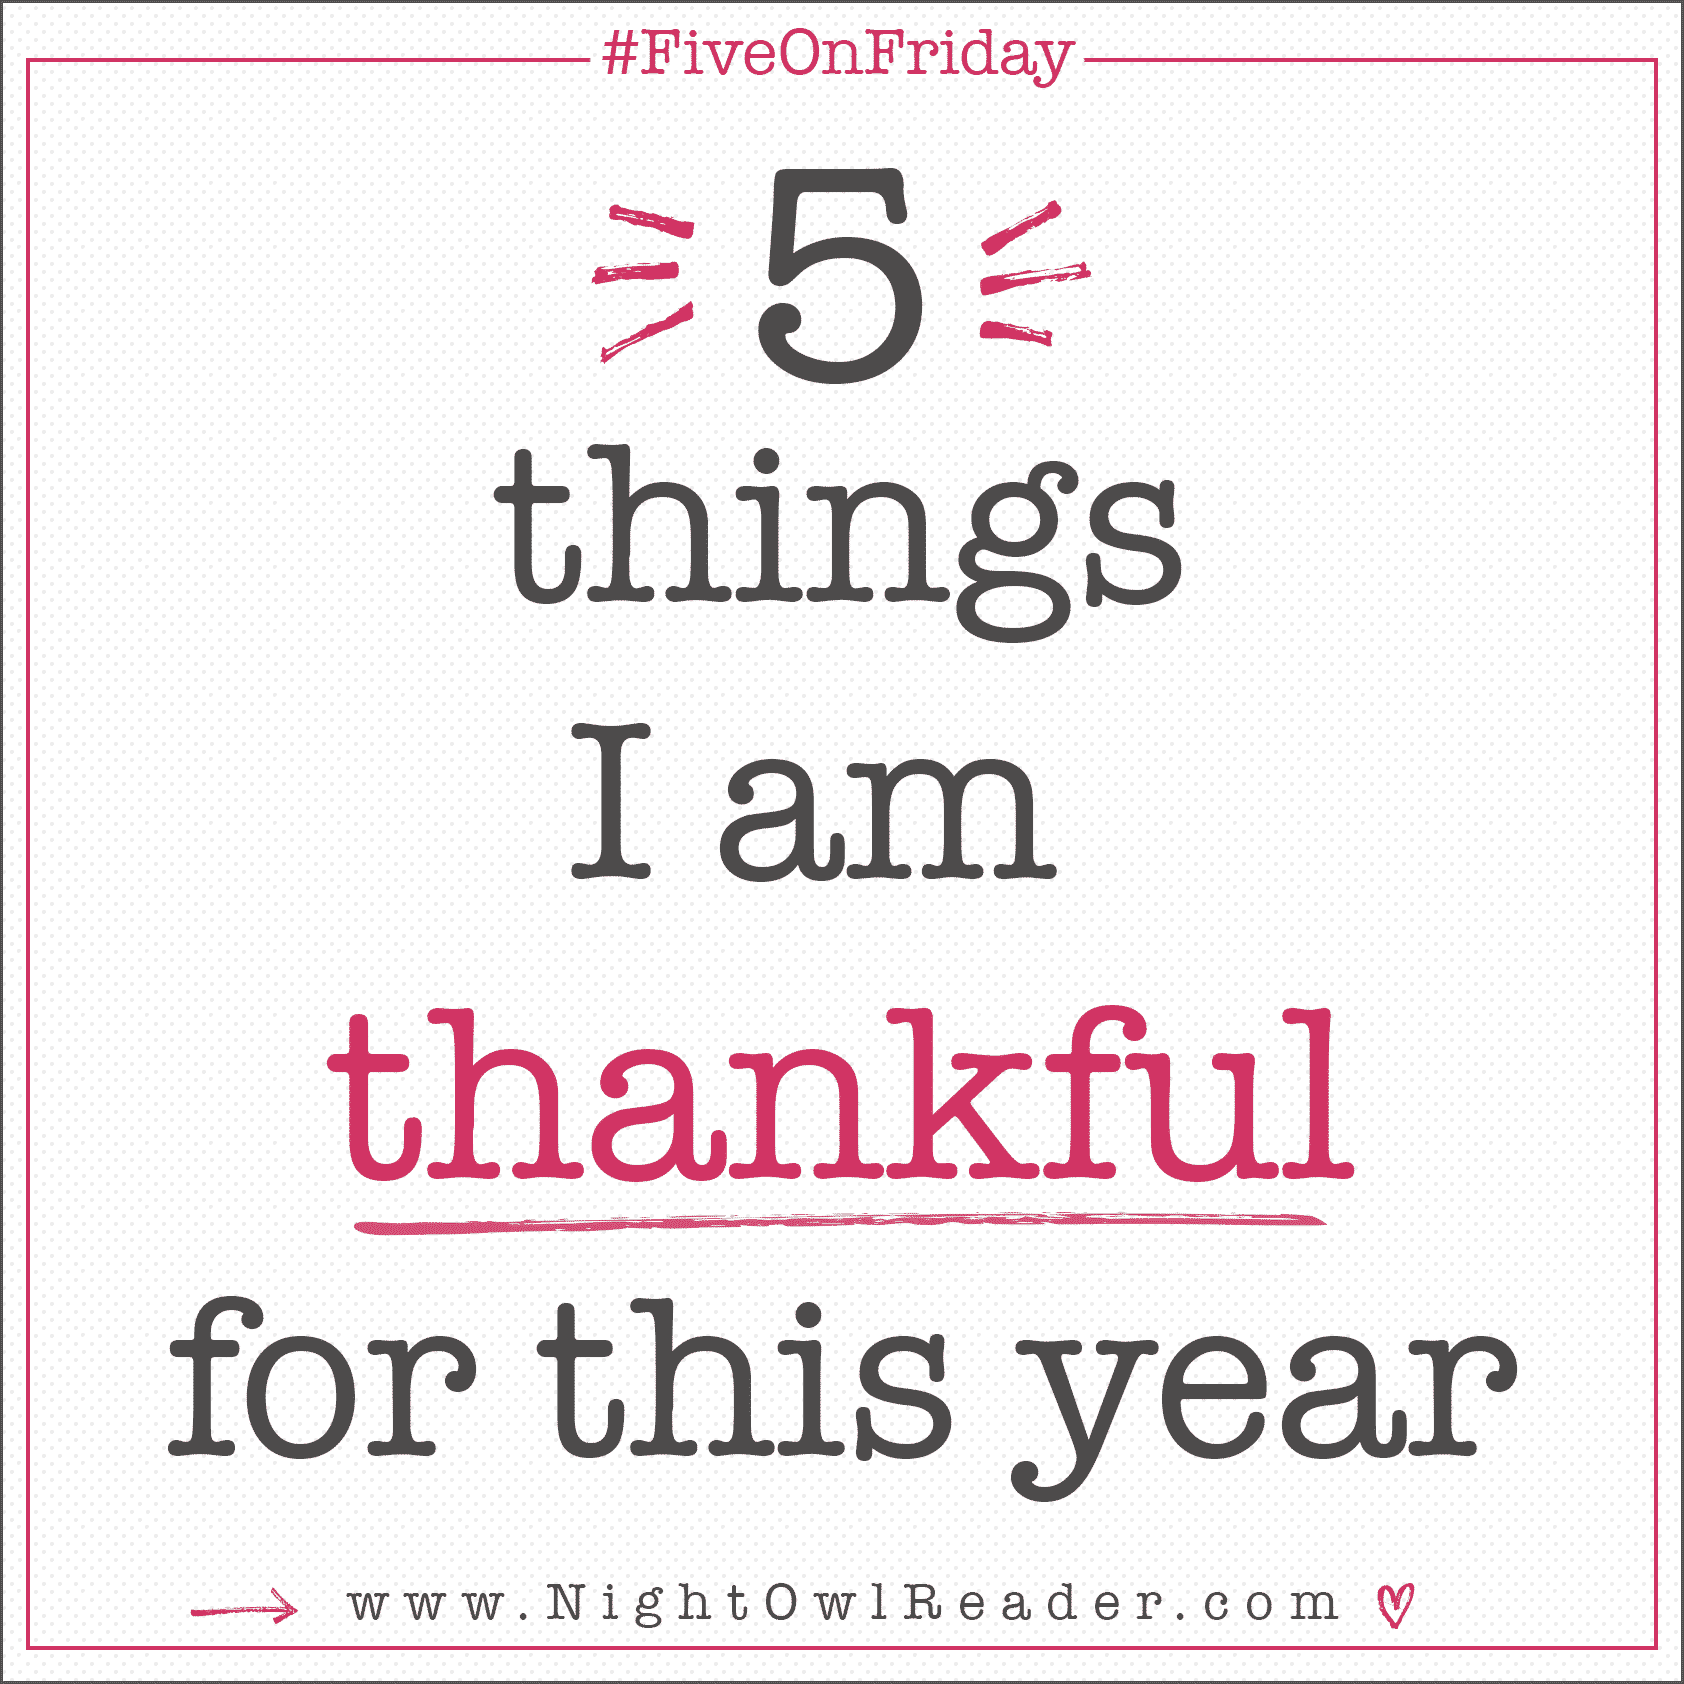 5 Things I Am Thankful For This Year!